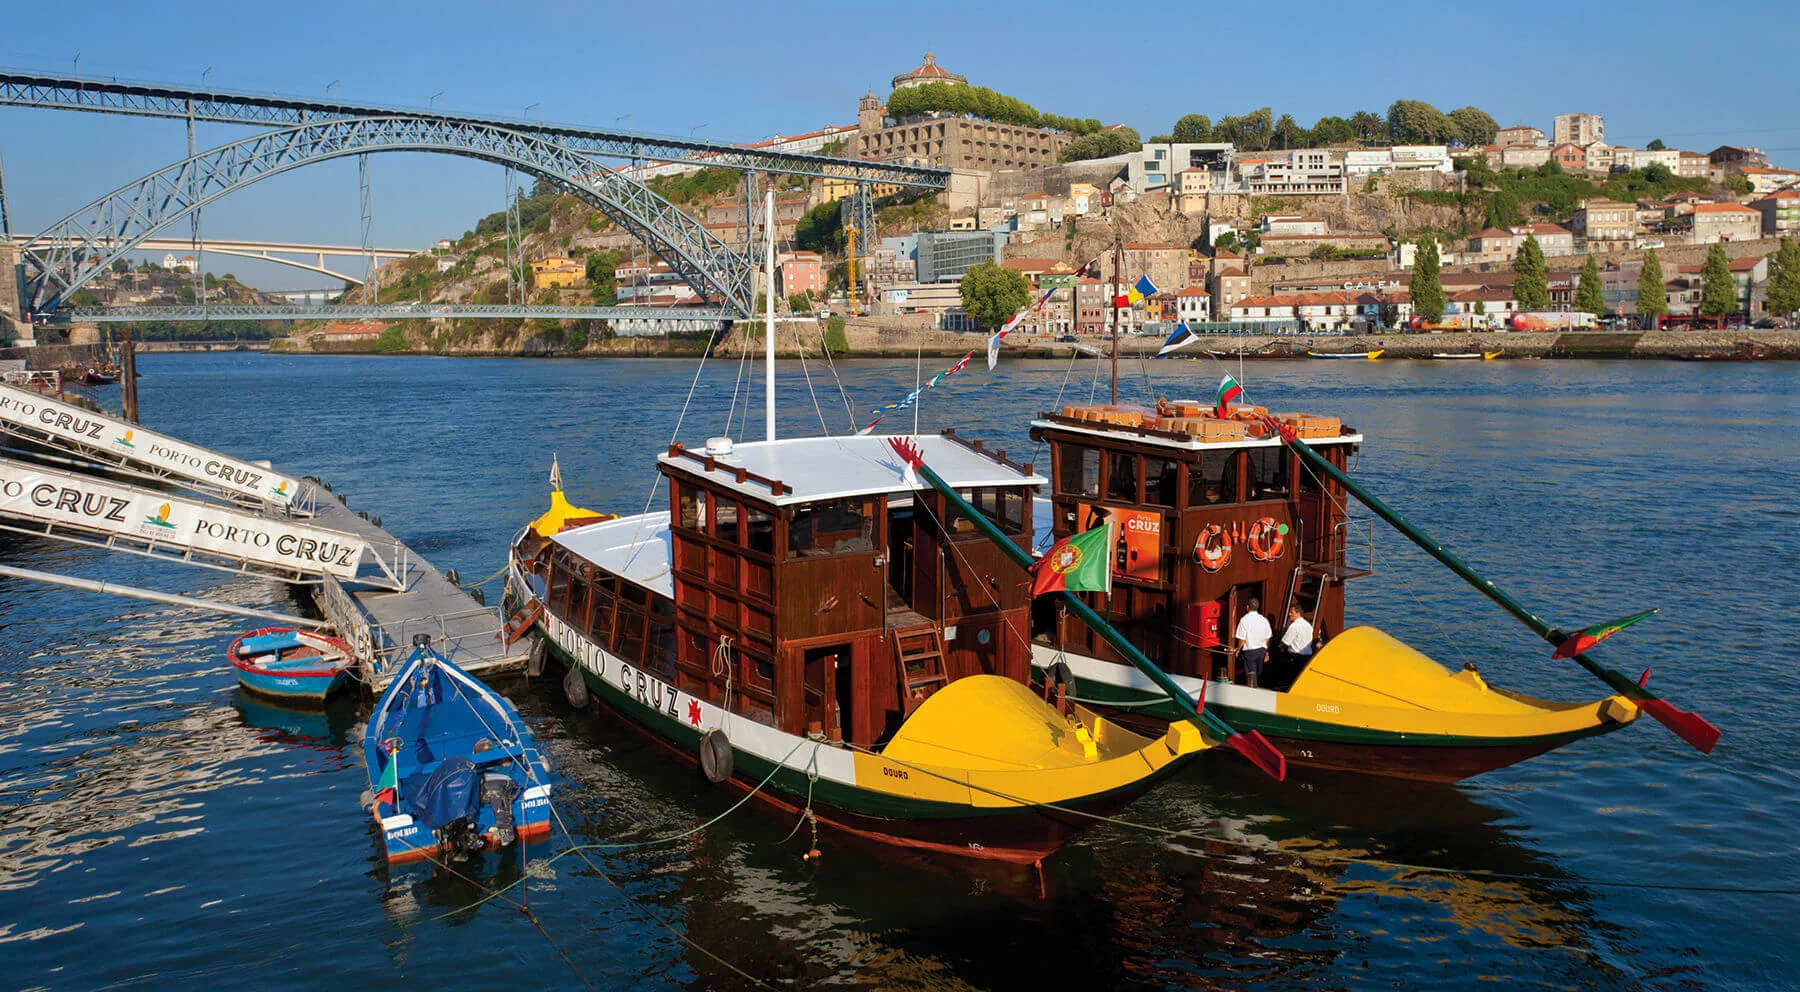 Traditional boats called “rabelos” await passengers on the banks of Douro